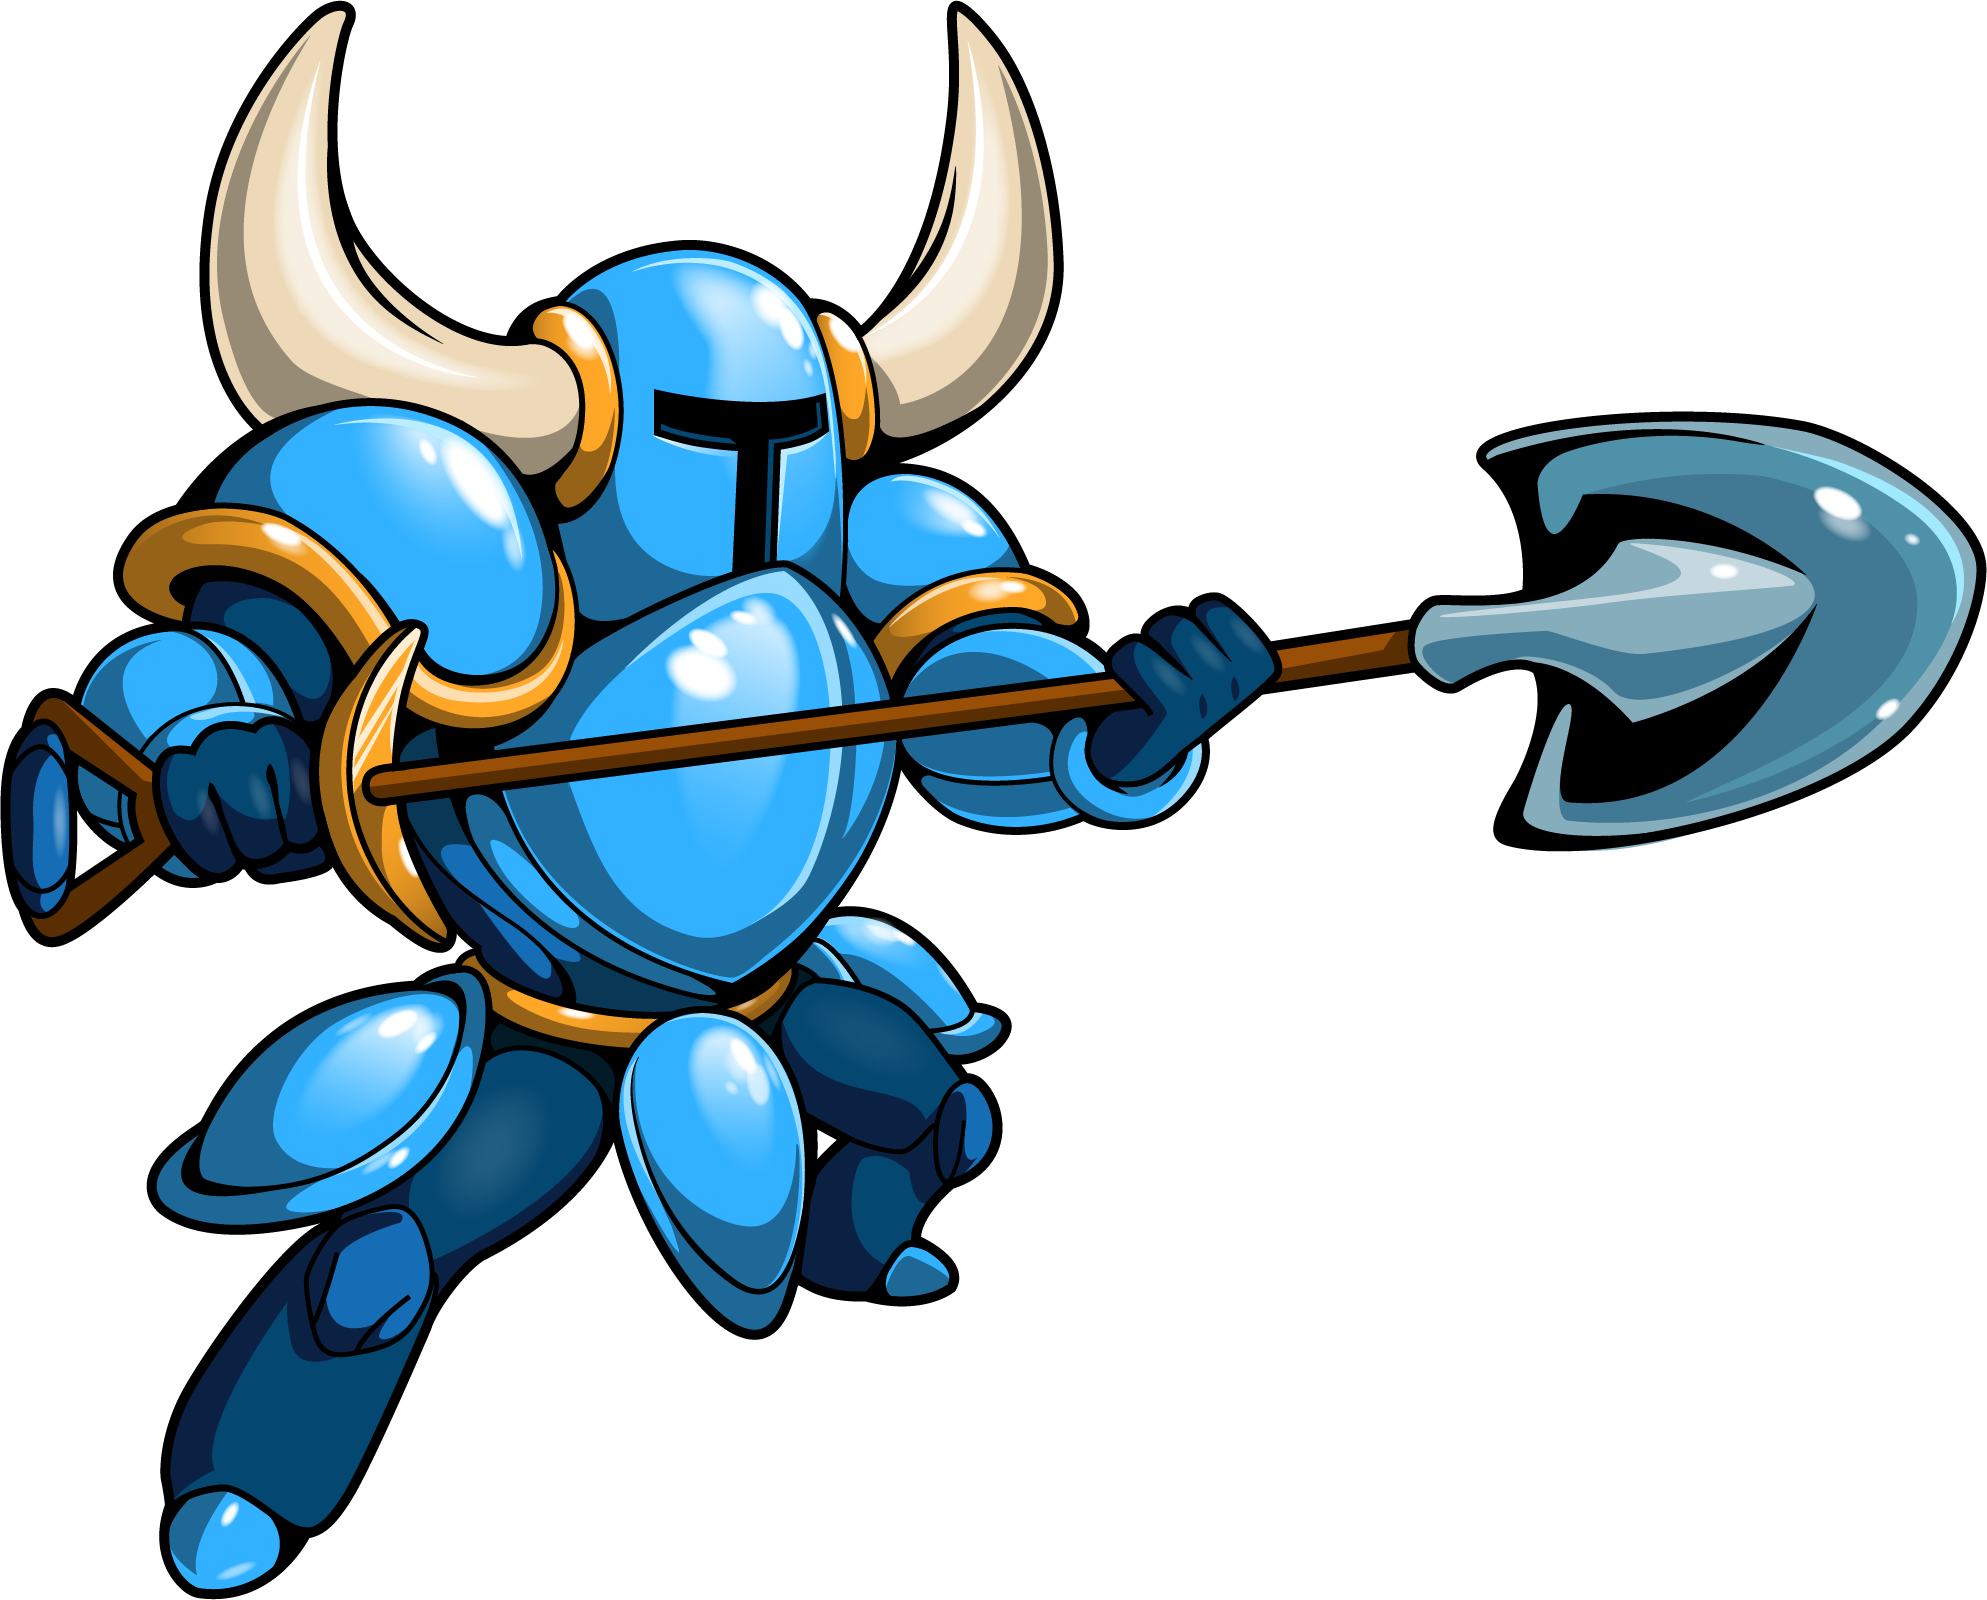 Yacht Club Games doesn't have much to say about rumors of Shovel Knight in  Smash Bros.